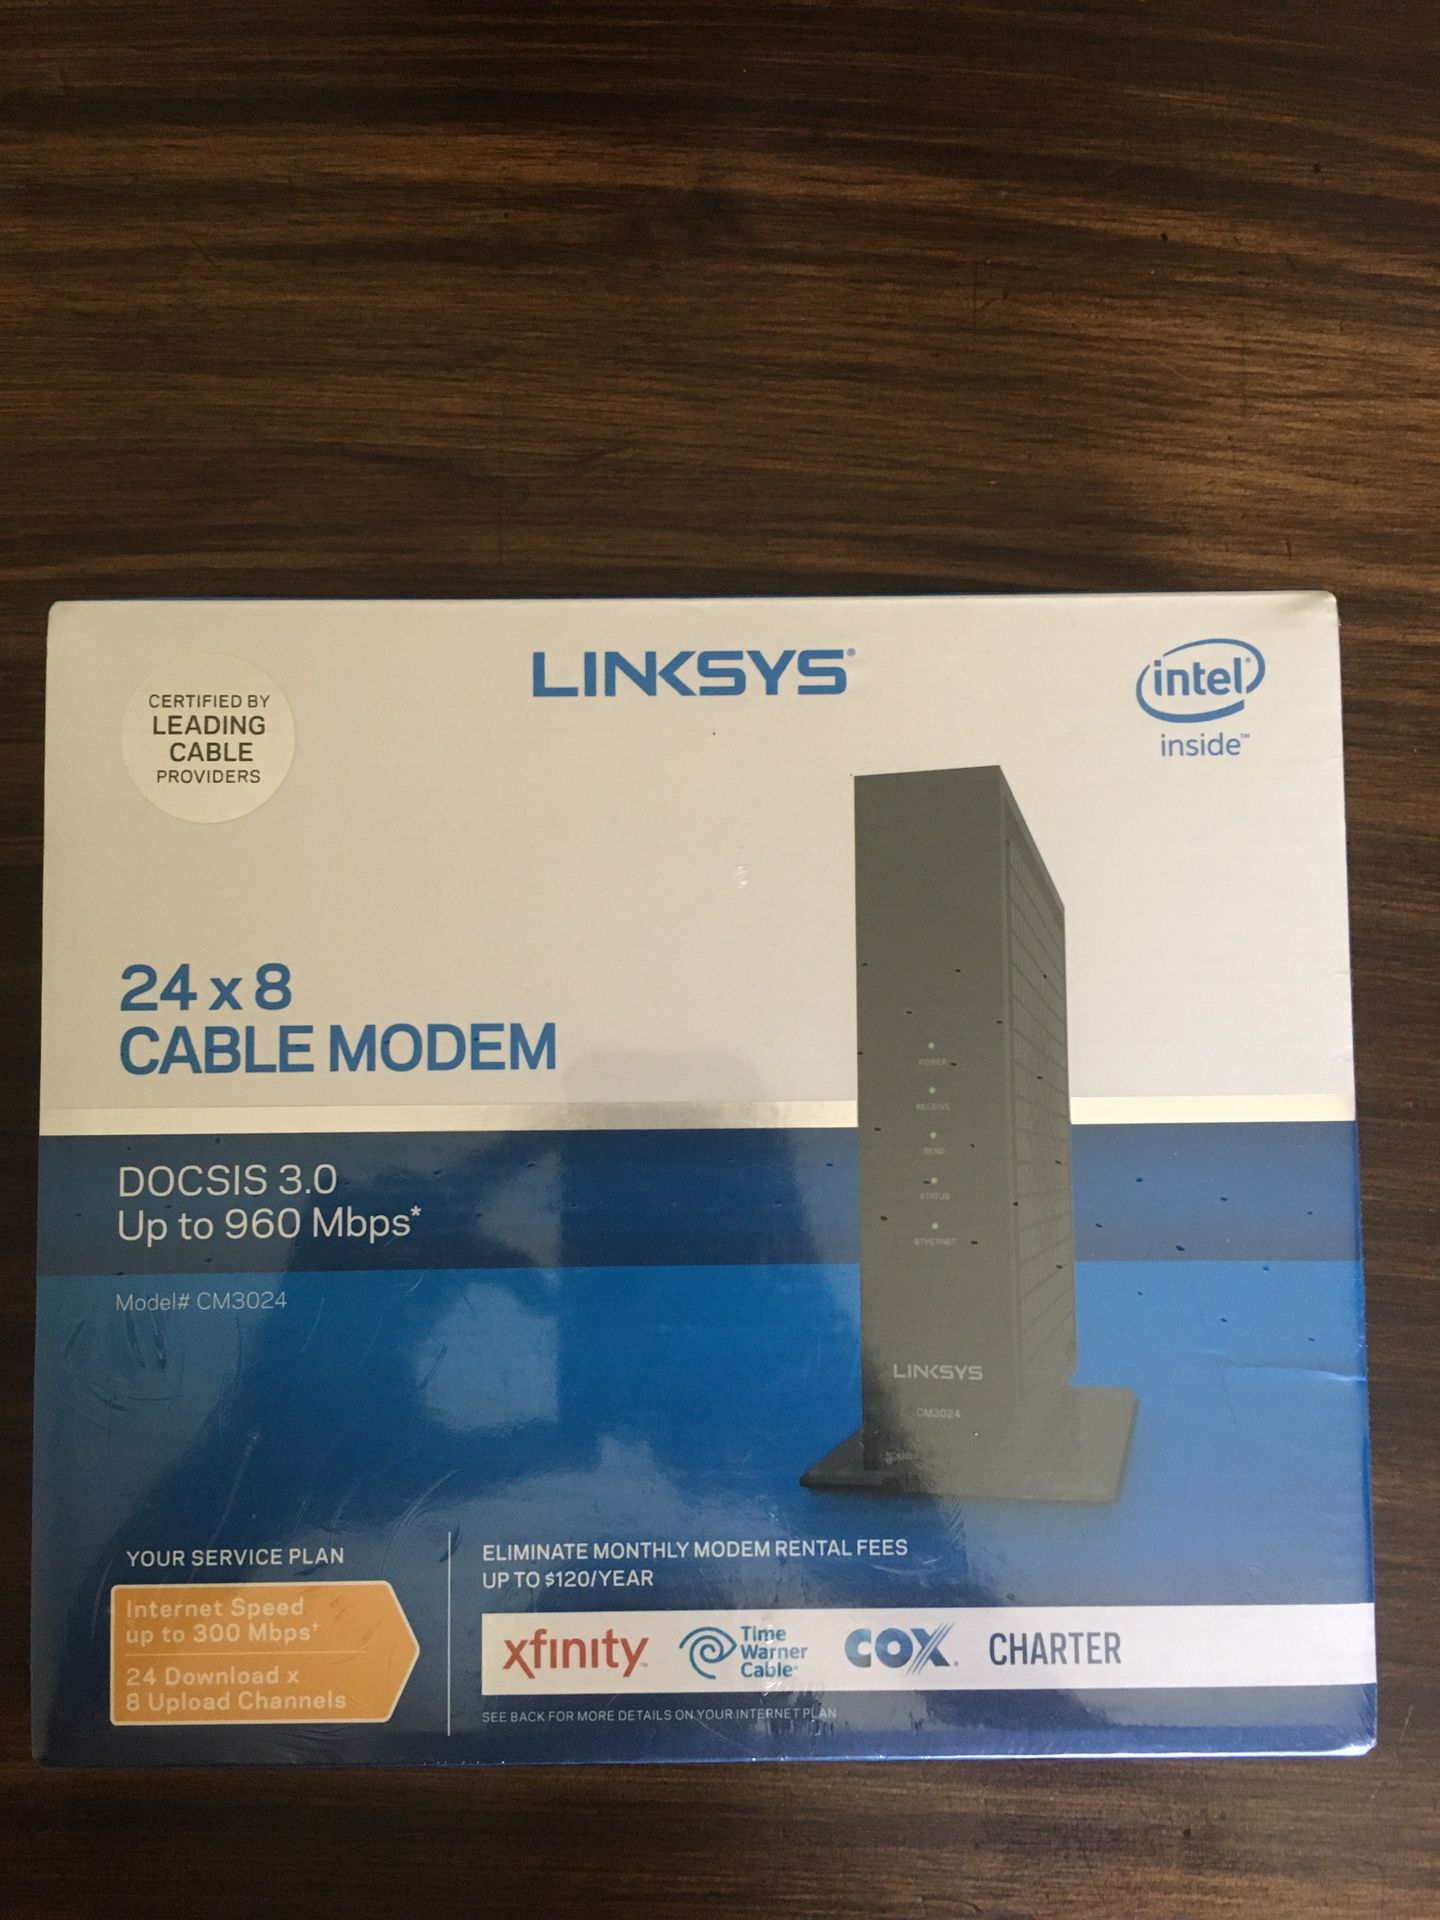 Linksys CM3024 High Speed DOCSIS 3.0 24x8 Cable Modem